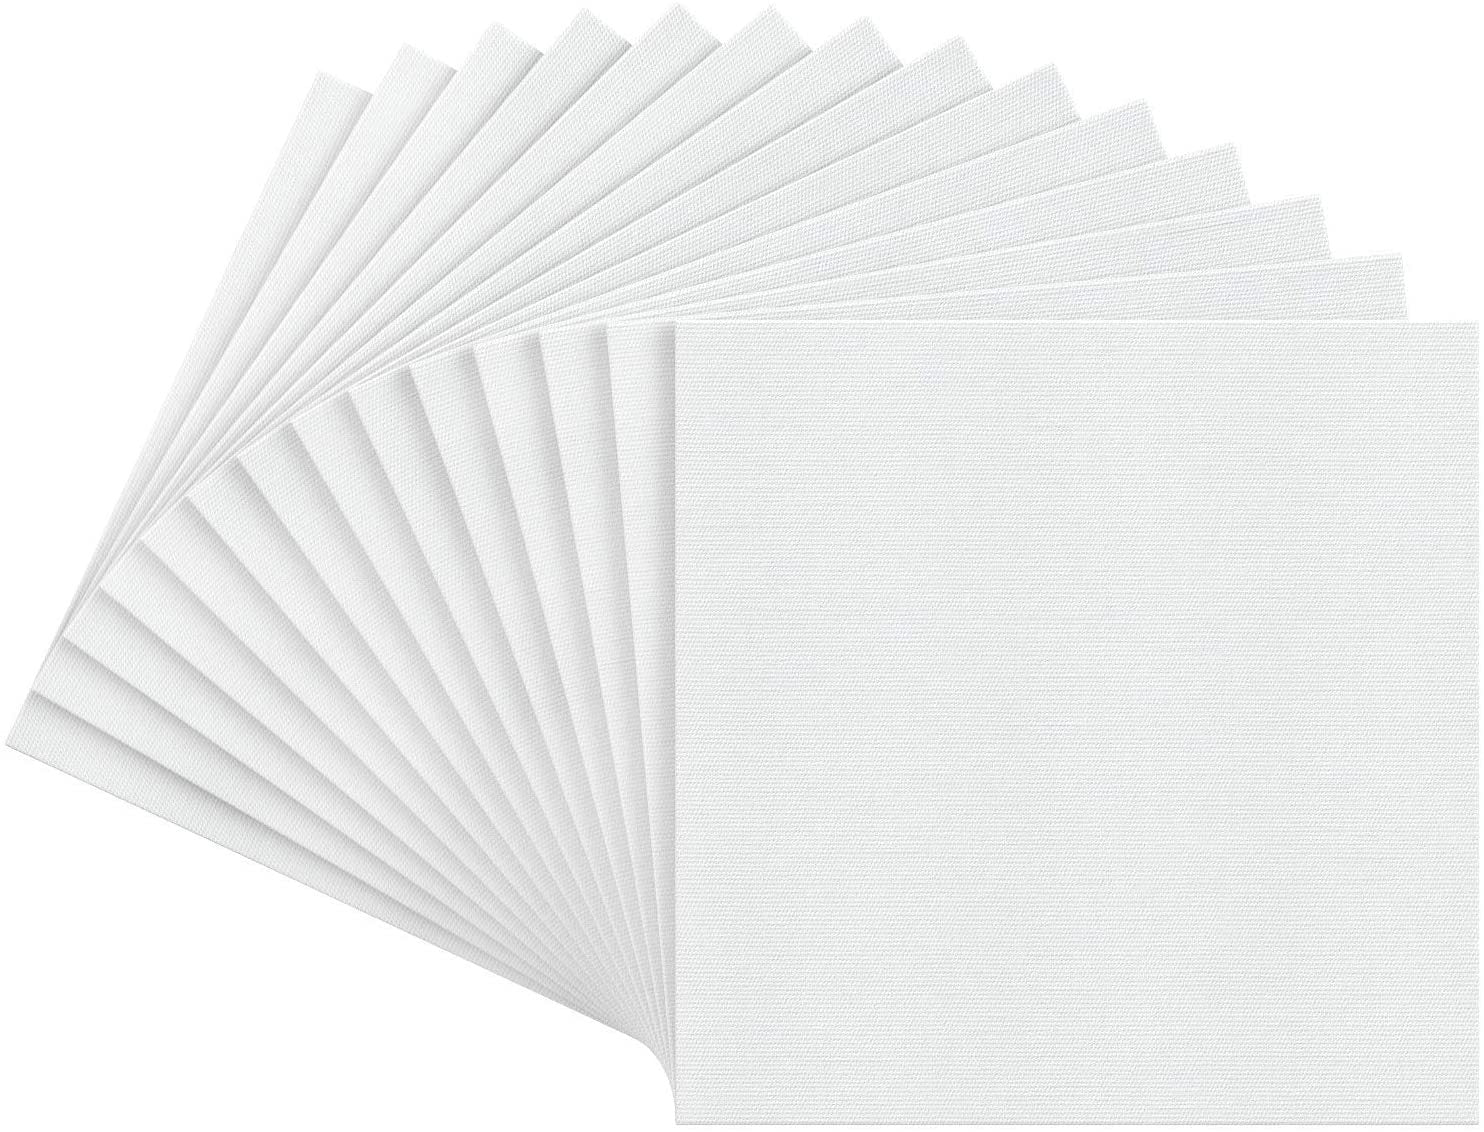  conda Canvases for Painting 12 x 12 inch, 14 Pack